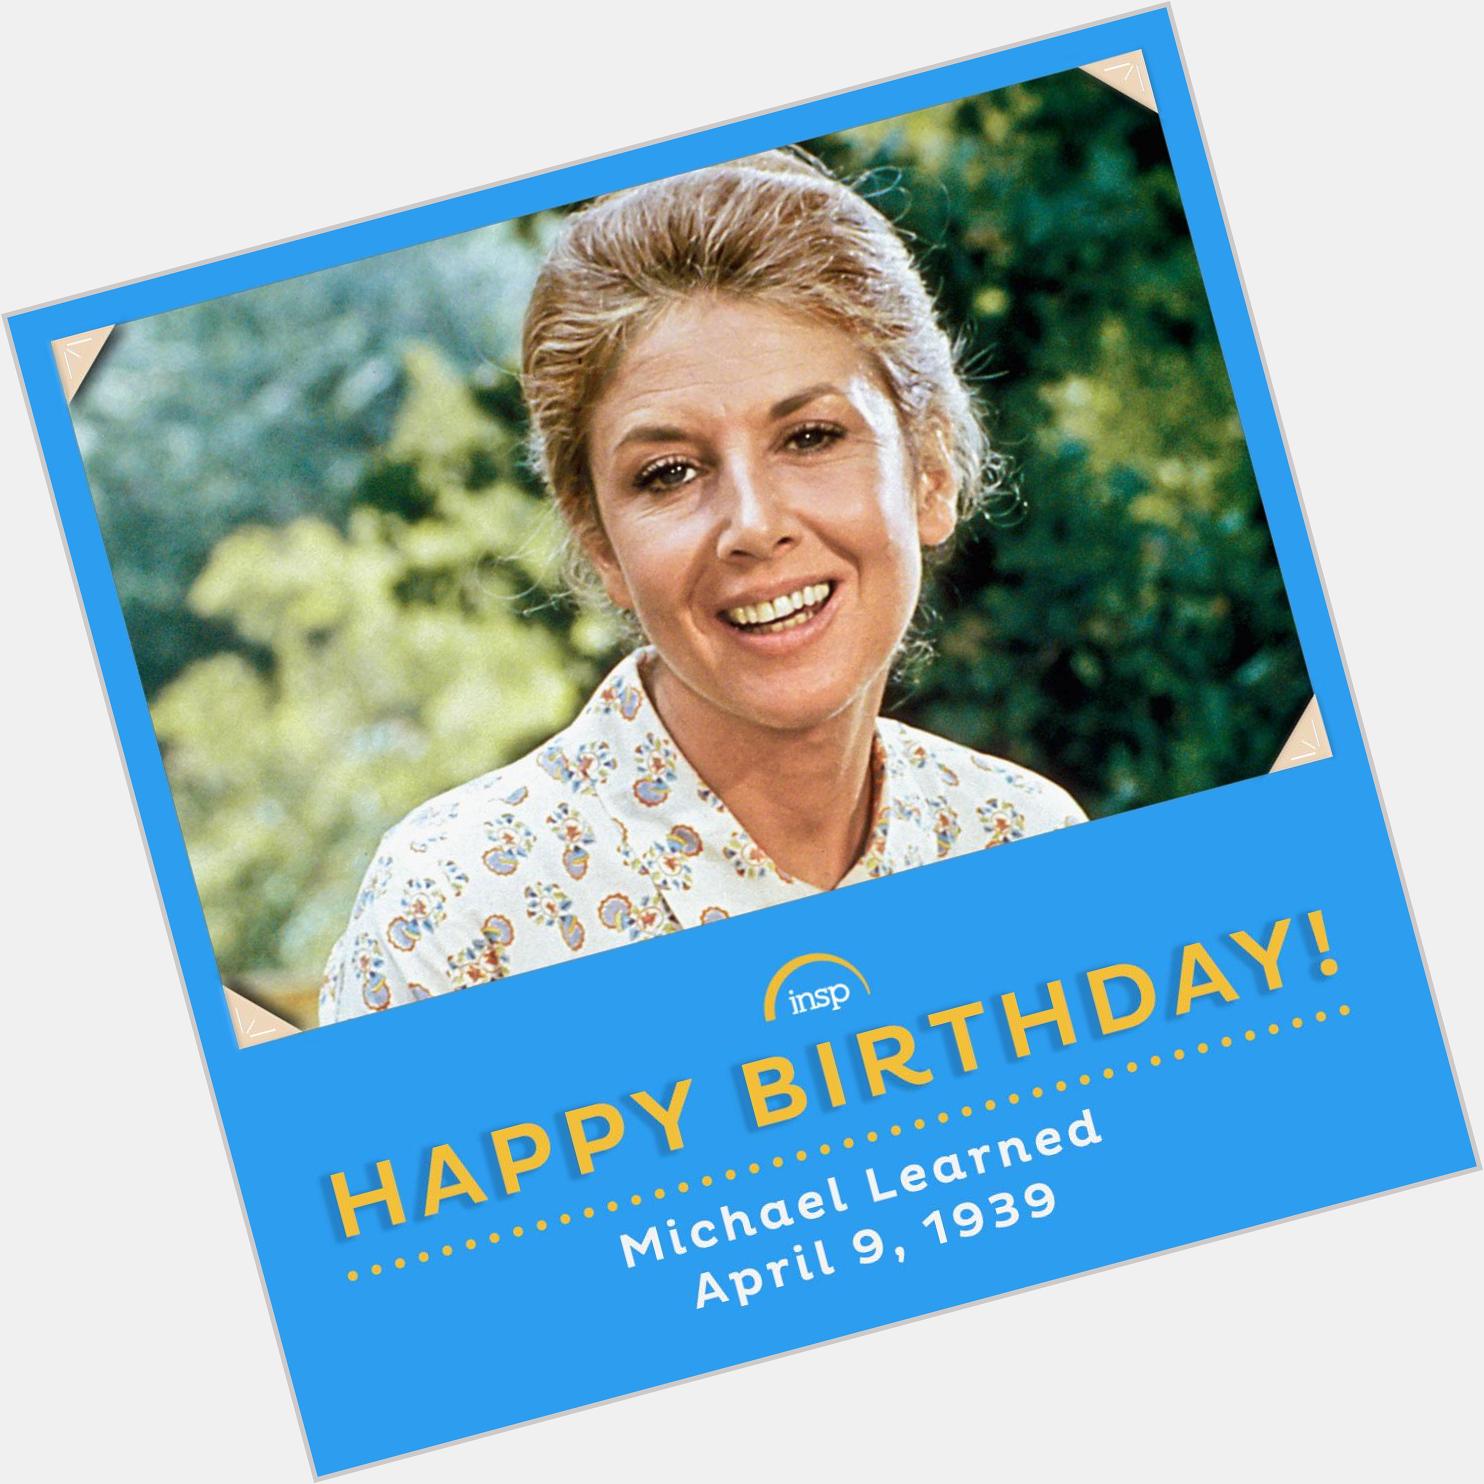 To wish the beautiful and talented Michael Learned a happy 76th birthday! 